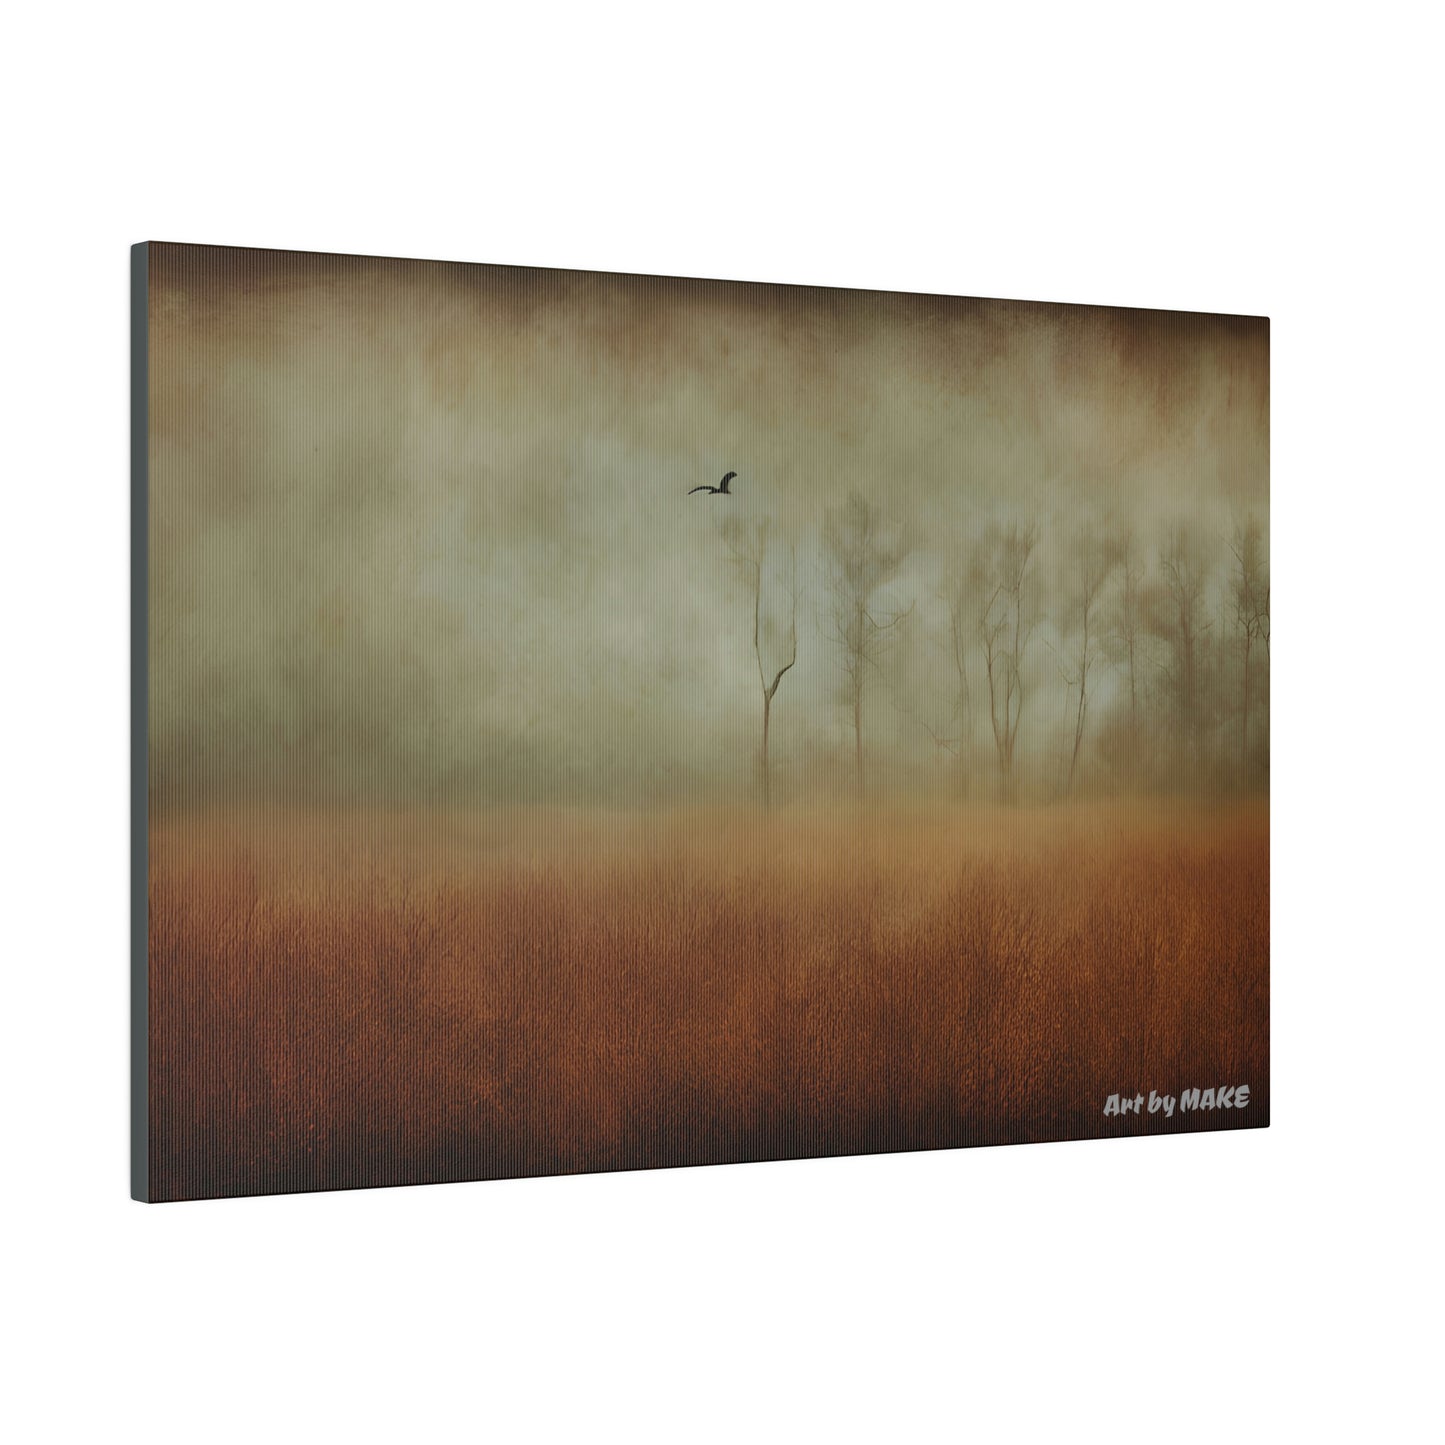 American Nature 3 - 24"x16" Matte Canvas, Stretched, 0.75"